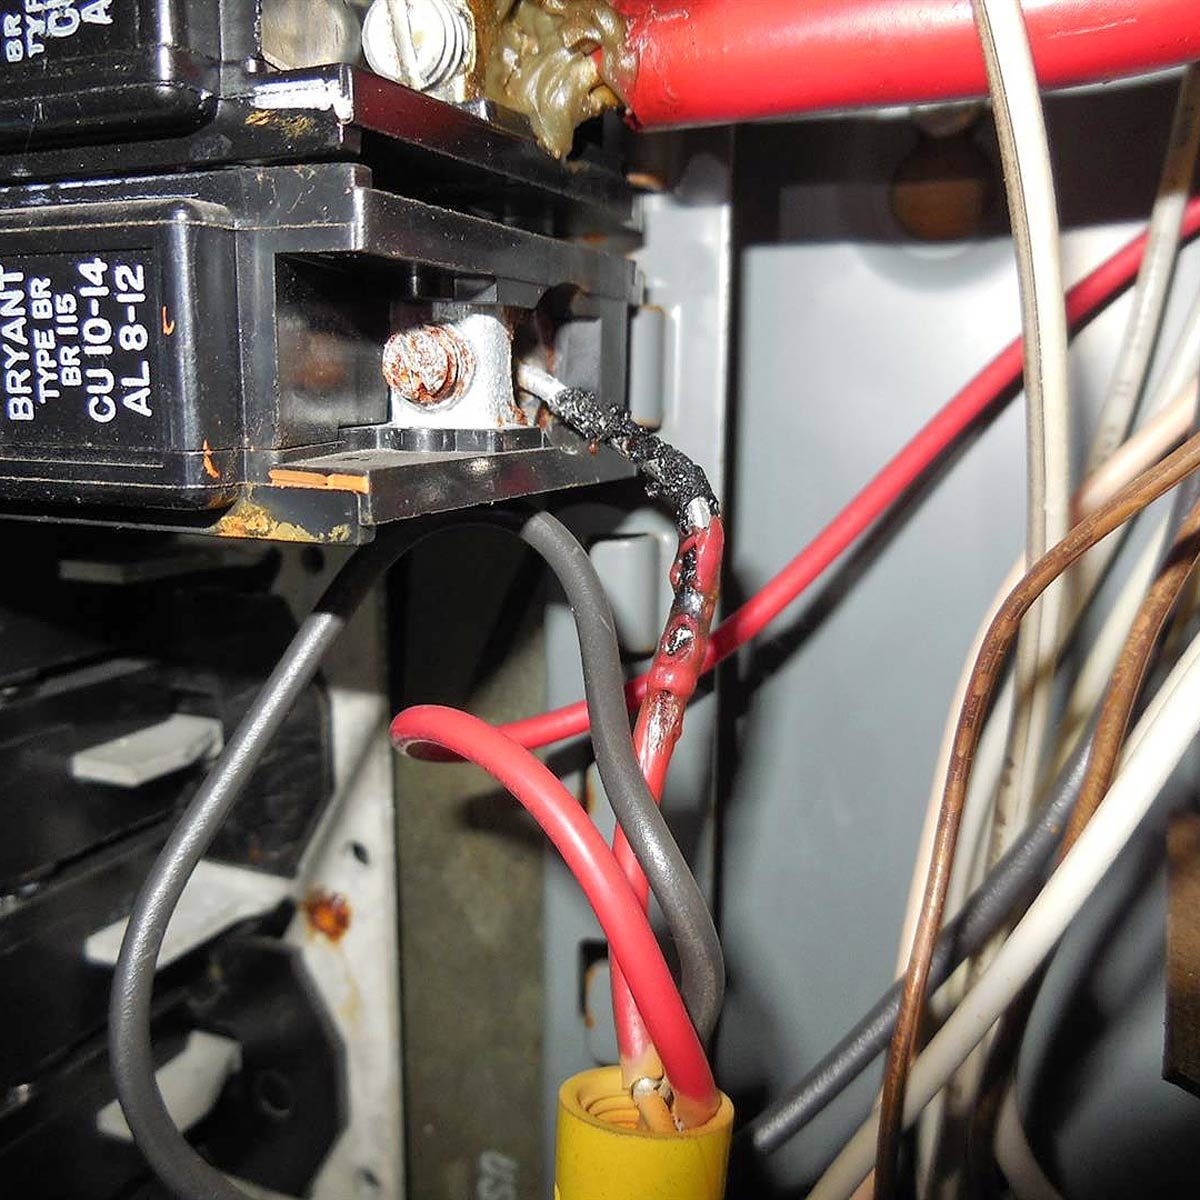 Aluminum Wiring Can Be Hazardous Here, How To Fix Aluminum Wiring In A House